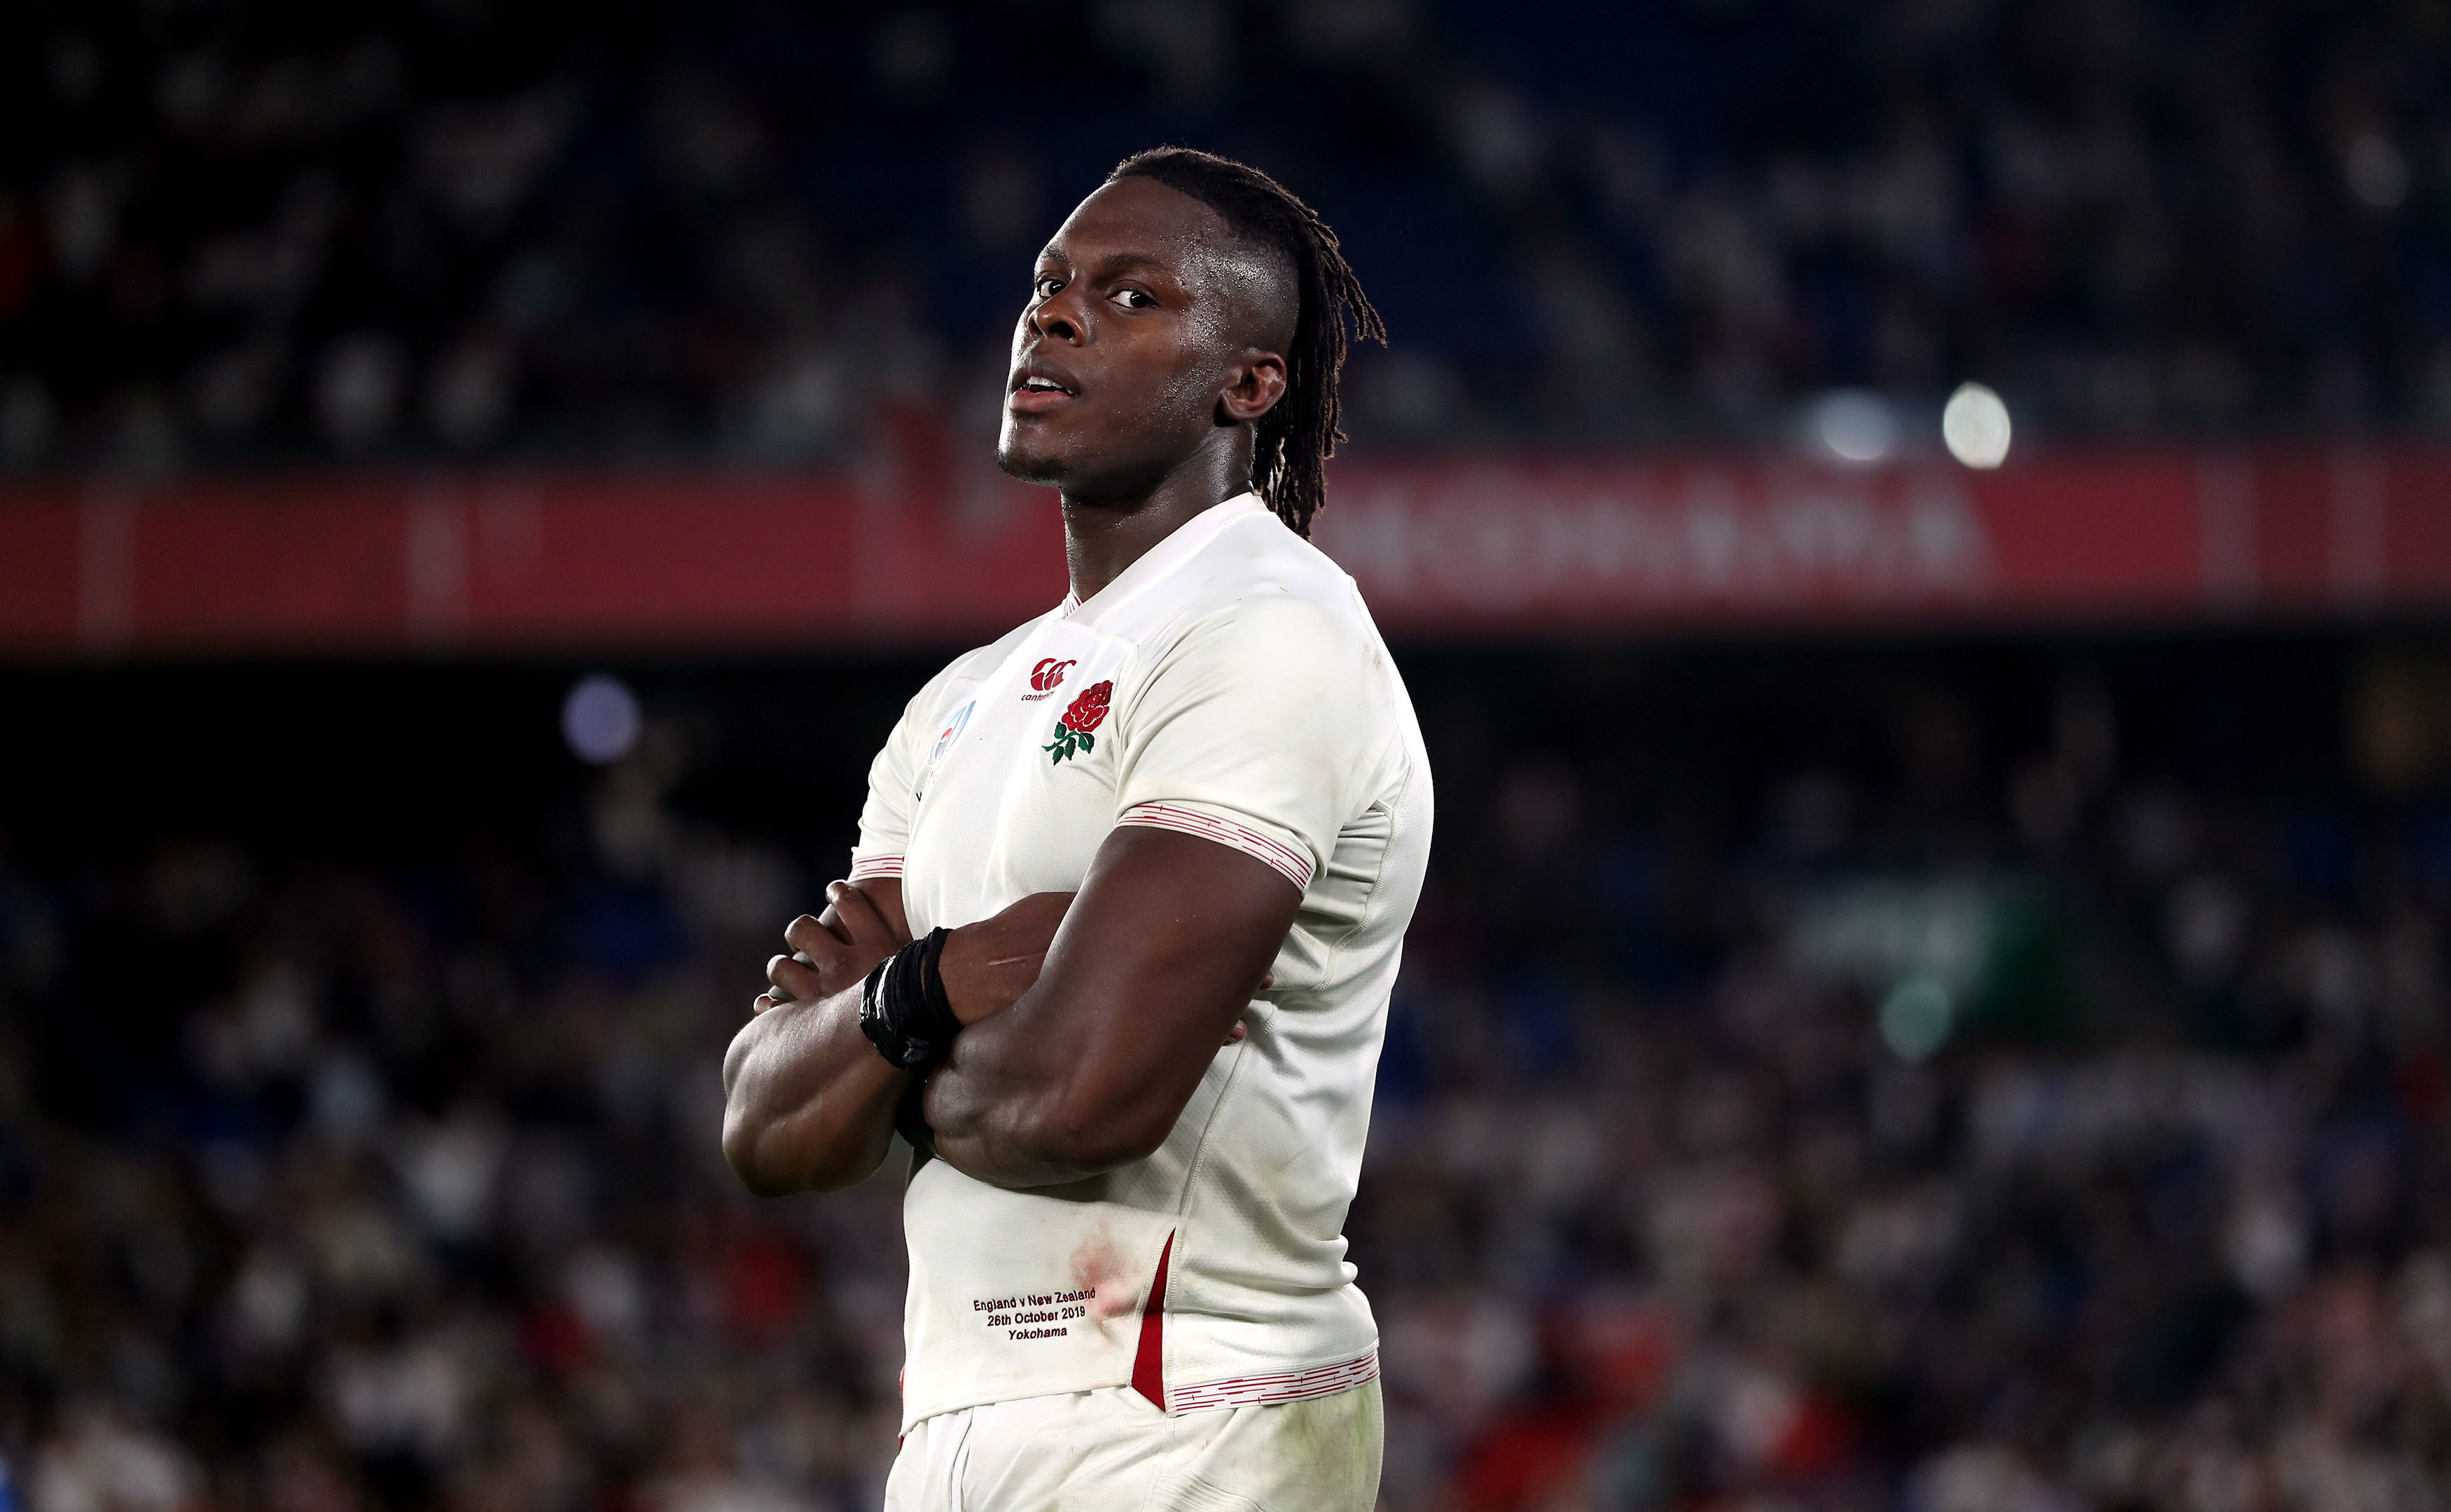 England's Maro Itoje has emerged as the outstanding player in world rugby at this World Cup.